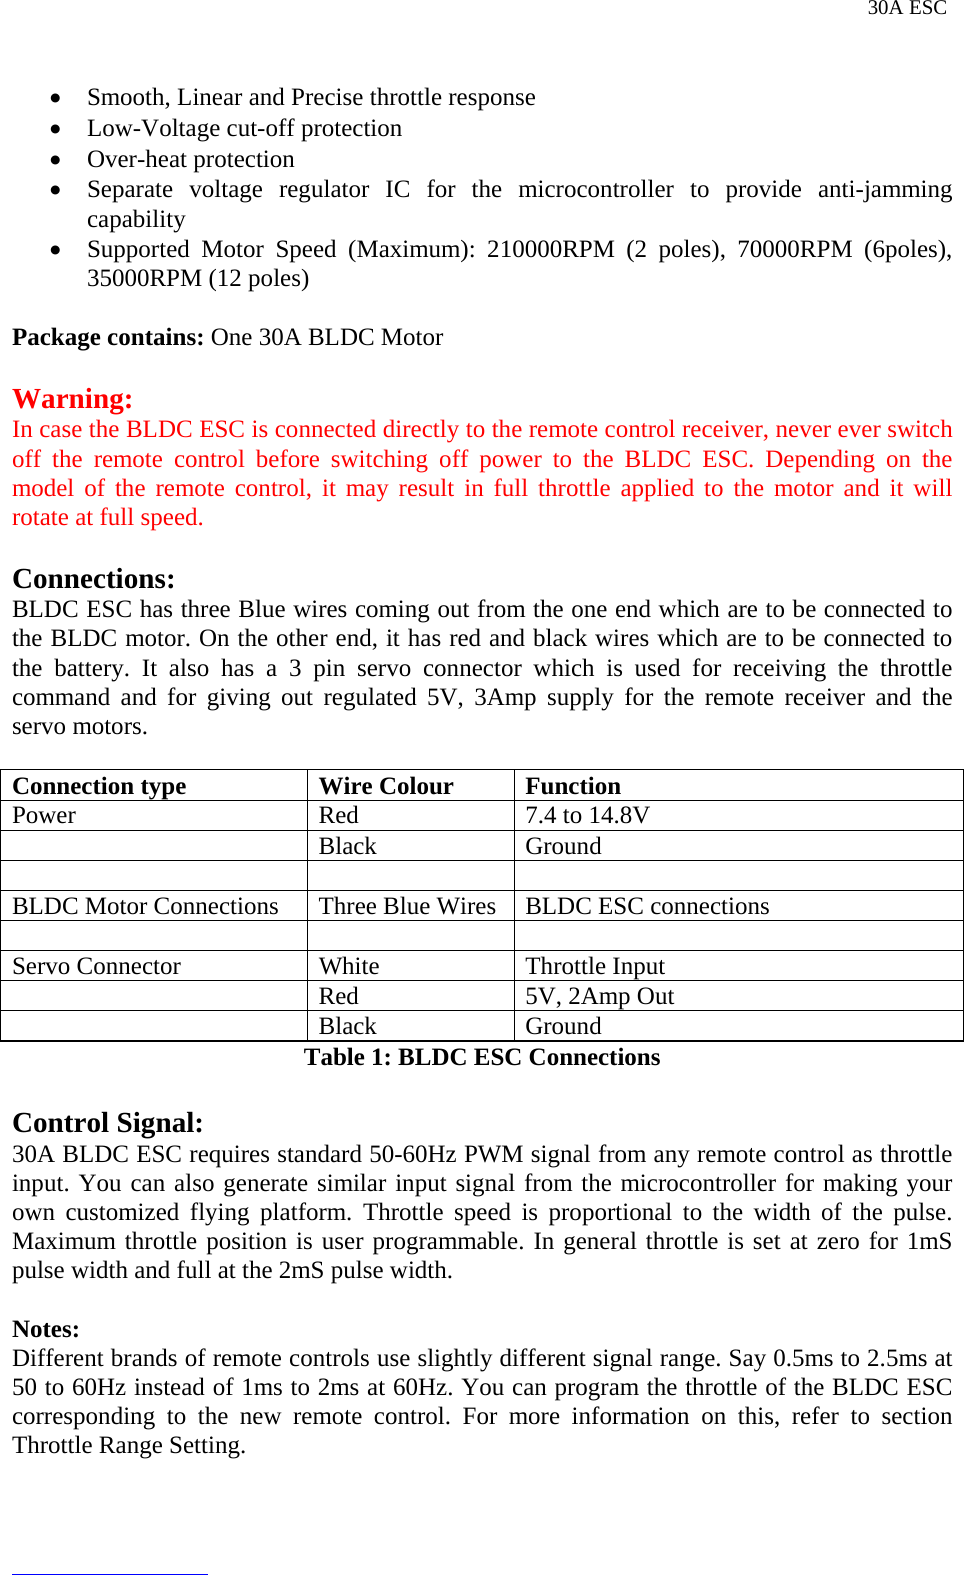 Page 2 of 9 - 30A BLDC ESC Product Manual 2012-06-08